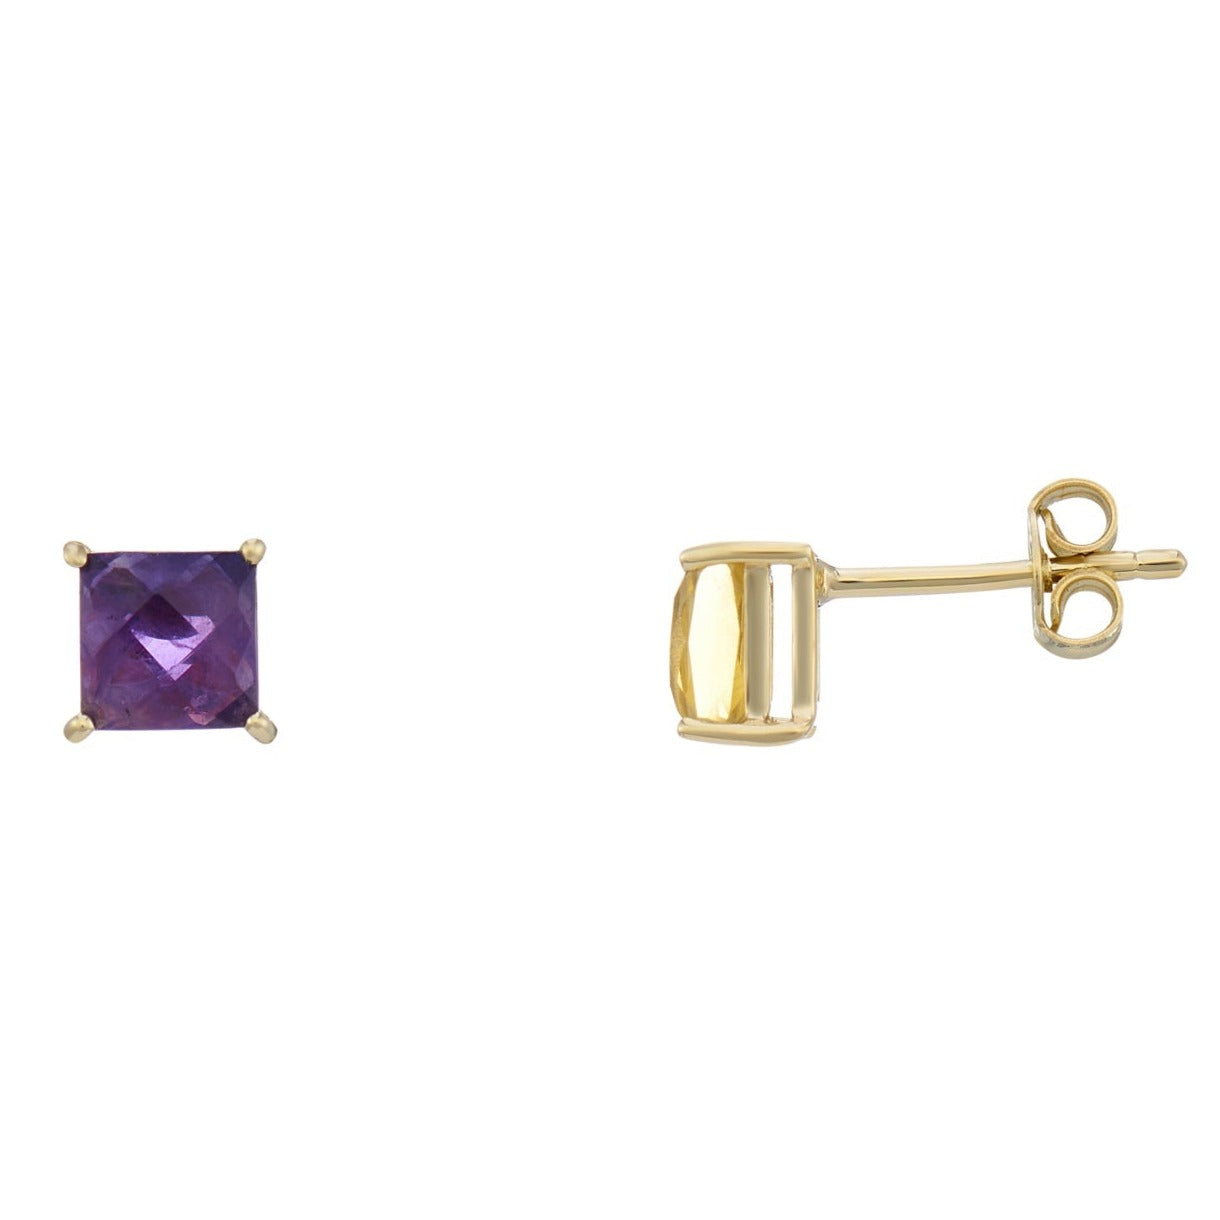 9ct gold 5mm square checkerboard cut amethyst stud earrings